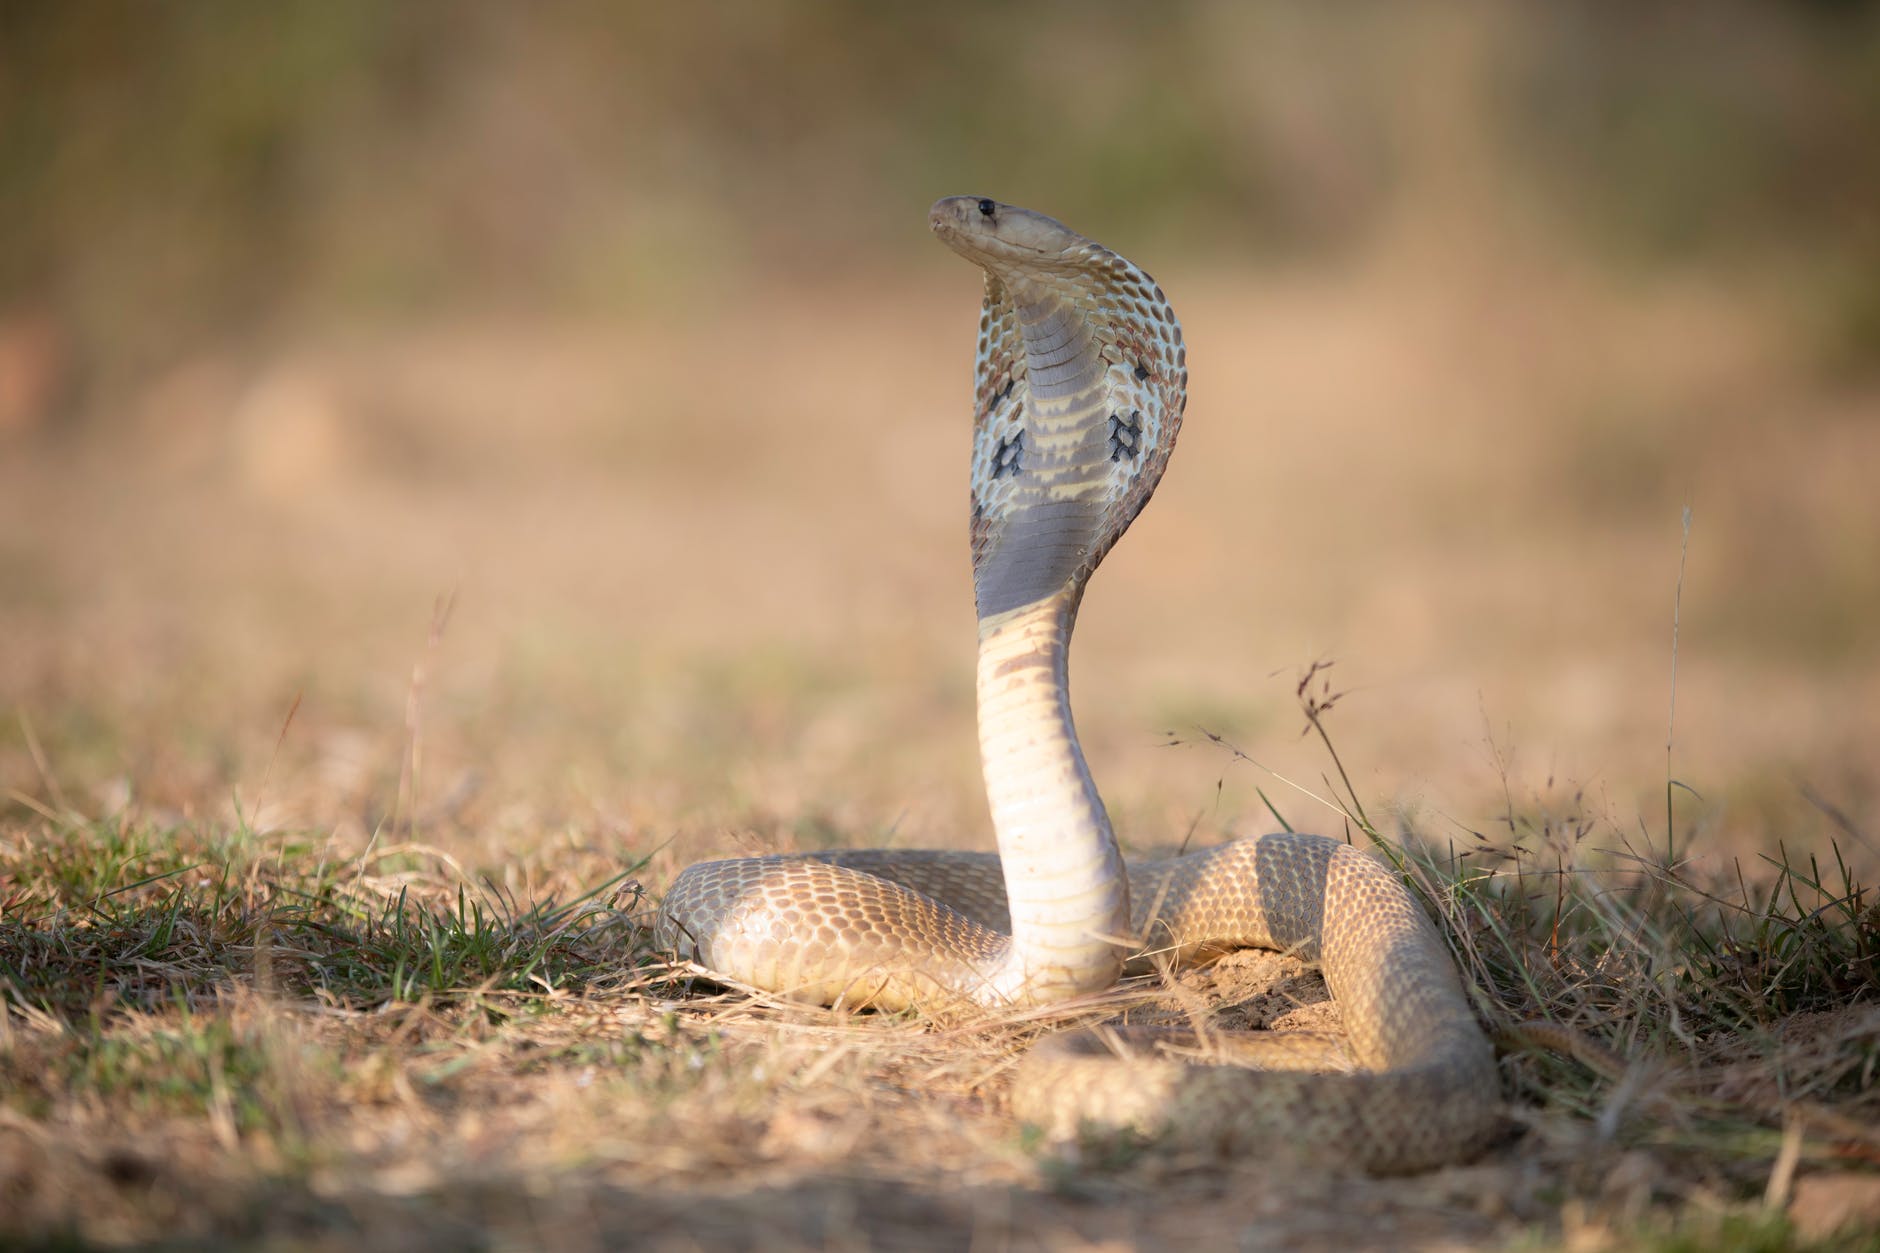 close up shot of a cobra snake on the ground